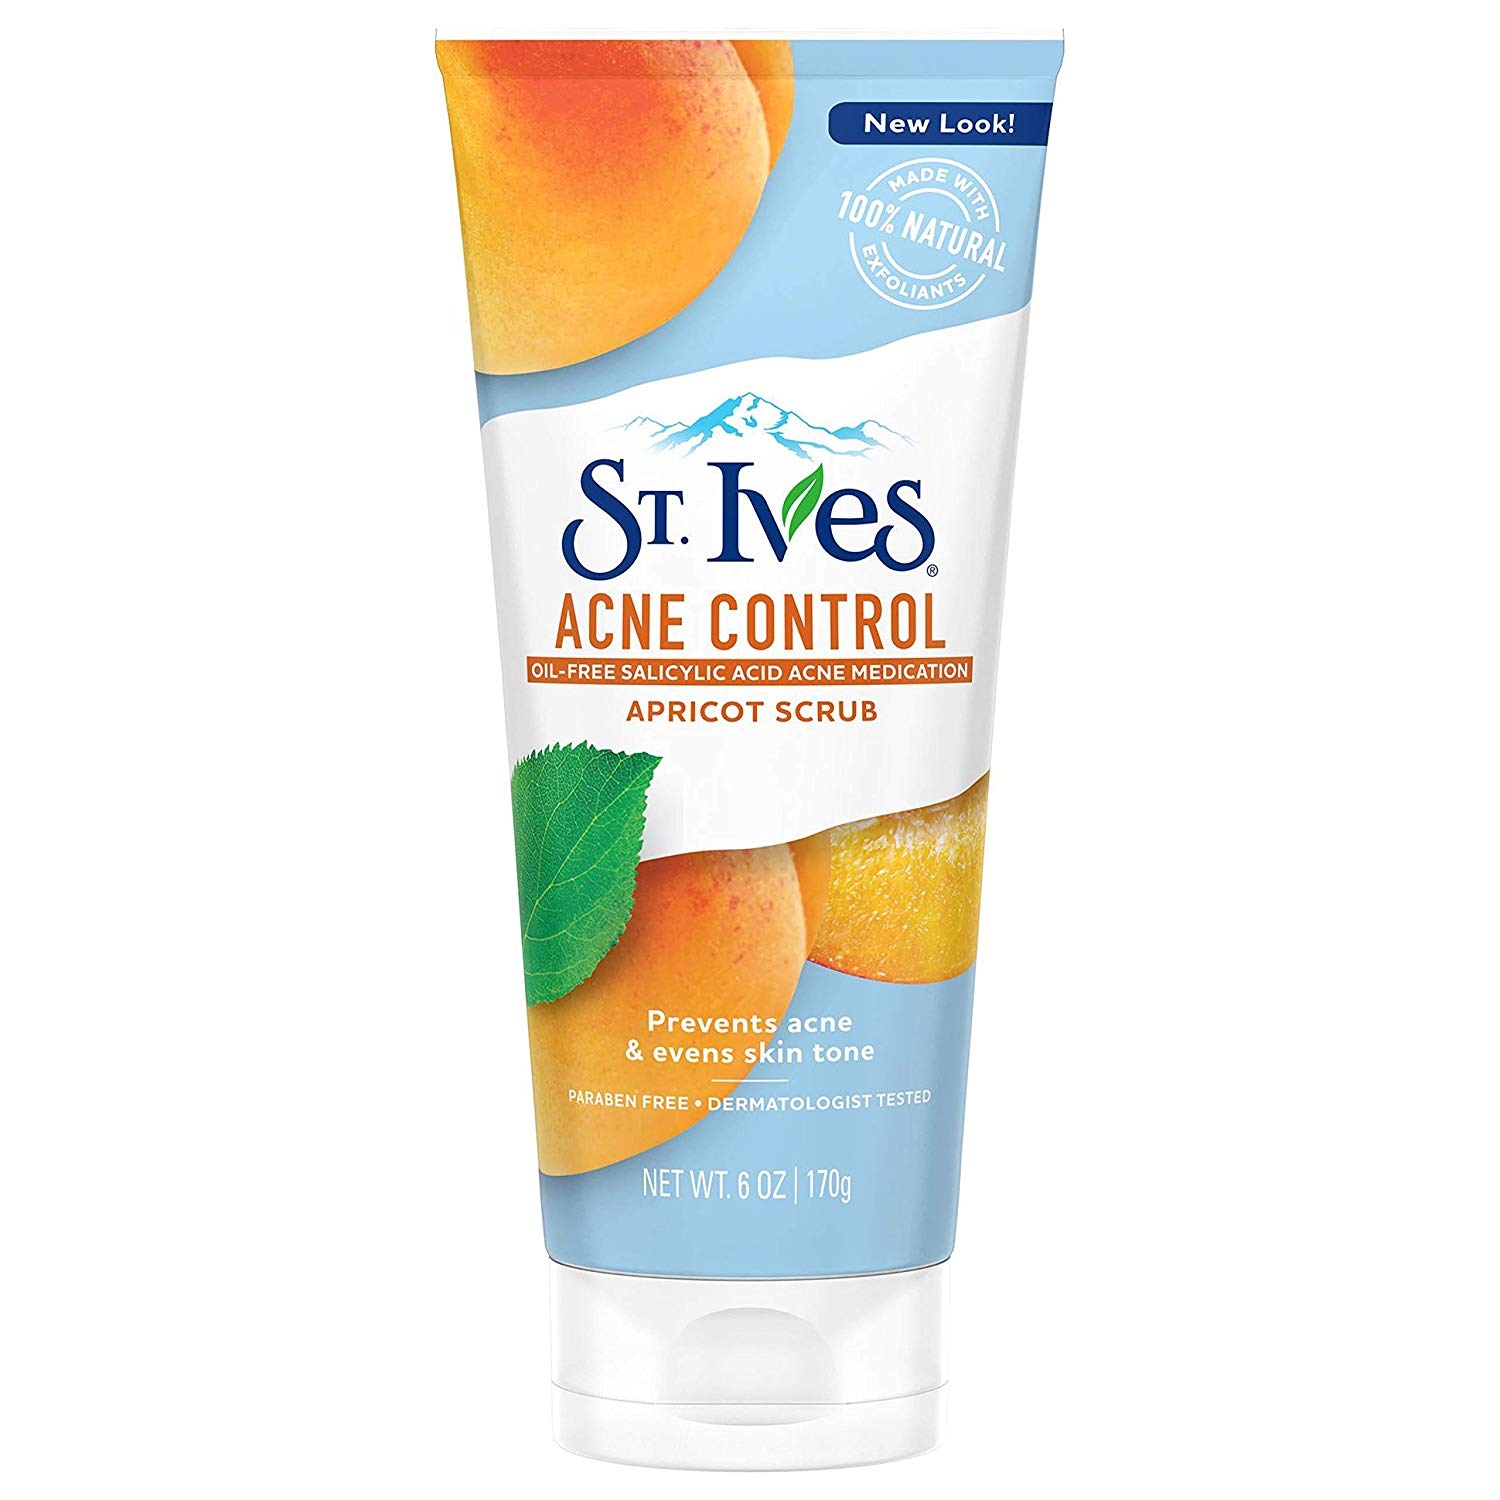 St. Ives Acne Control Apricot Face Scrub-0